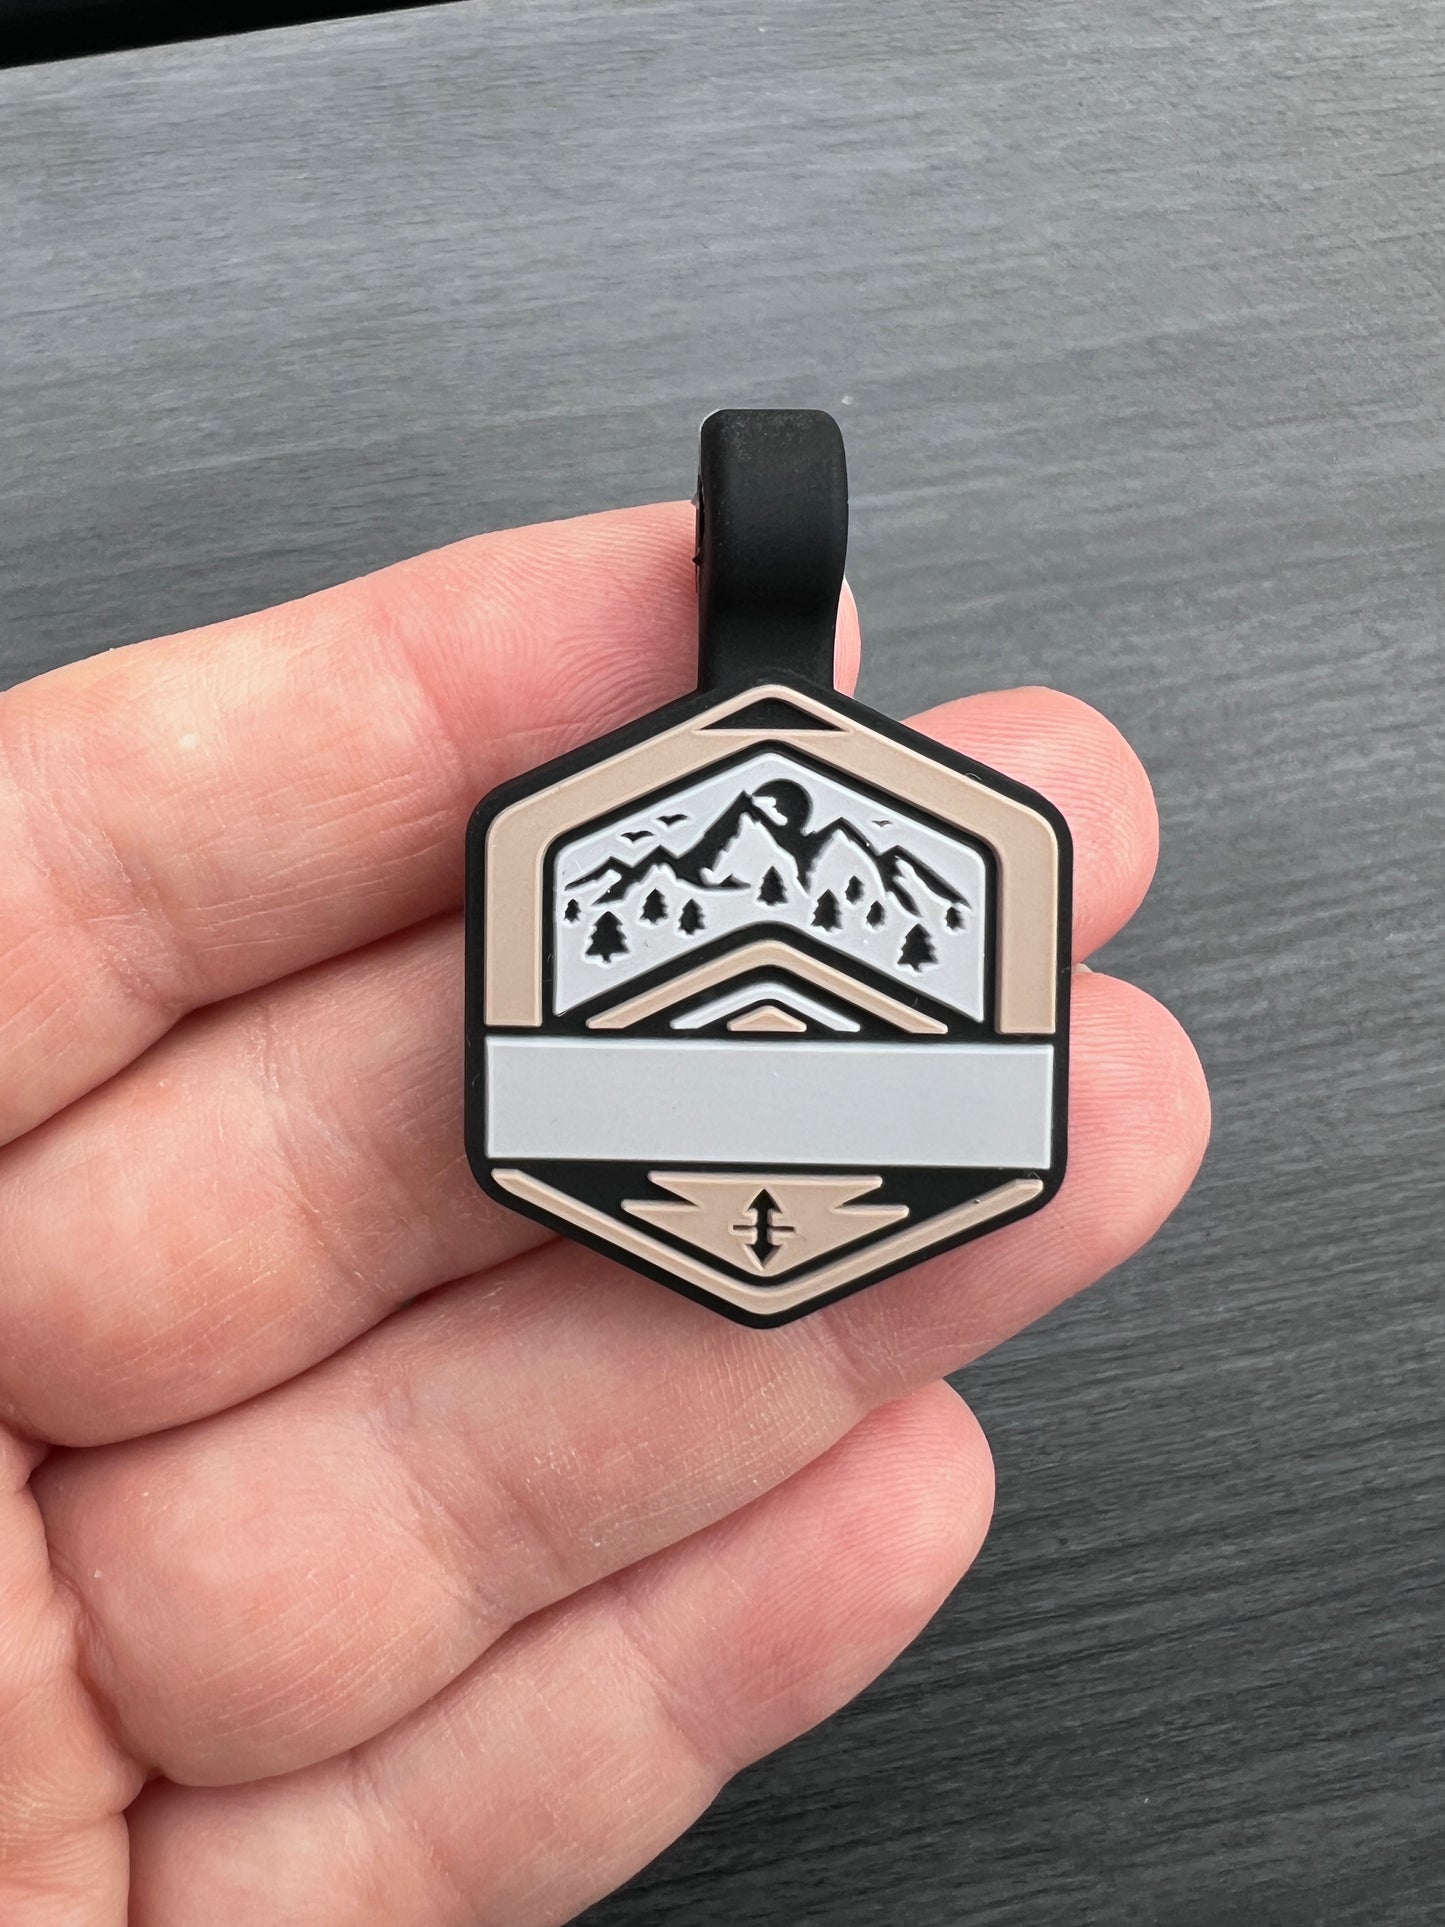 Nalion SILENT TAGS - TAUPE // 26x29mm - personalized silicone pet tag in the unique Nalion design